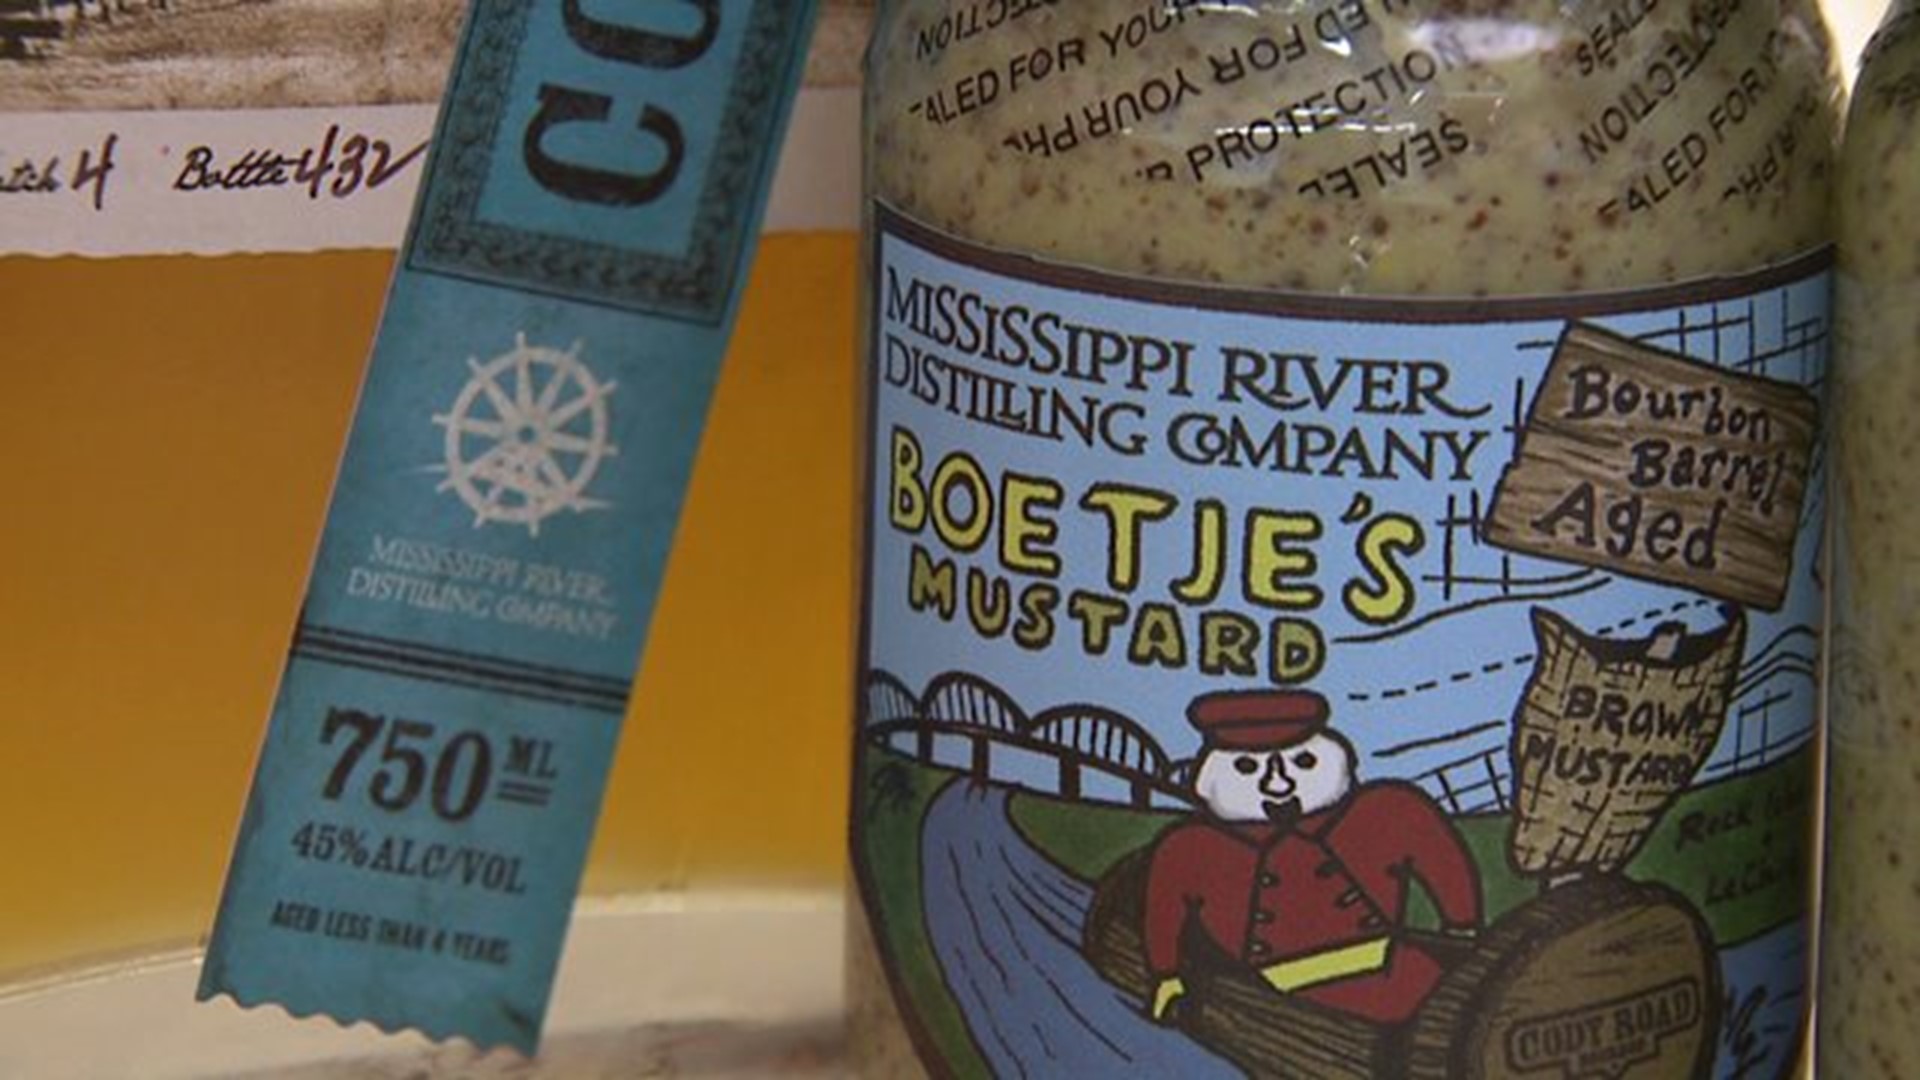 Boetje`s and Mississippi Distilling teaming up for whiskey mustard